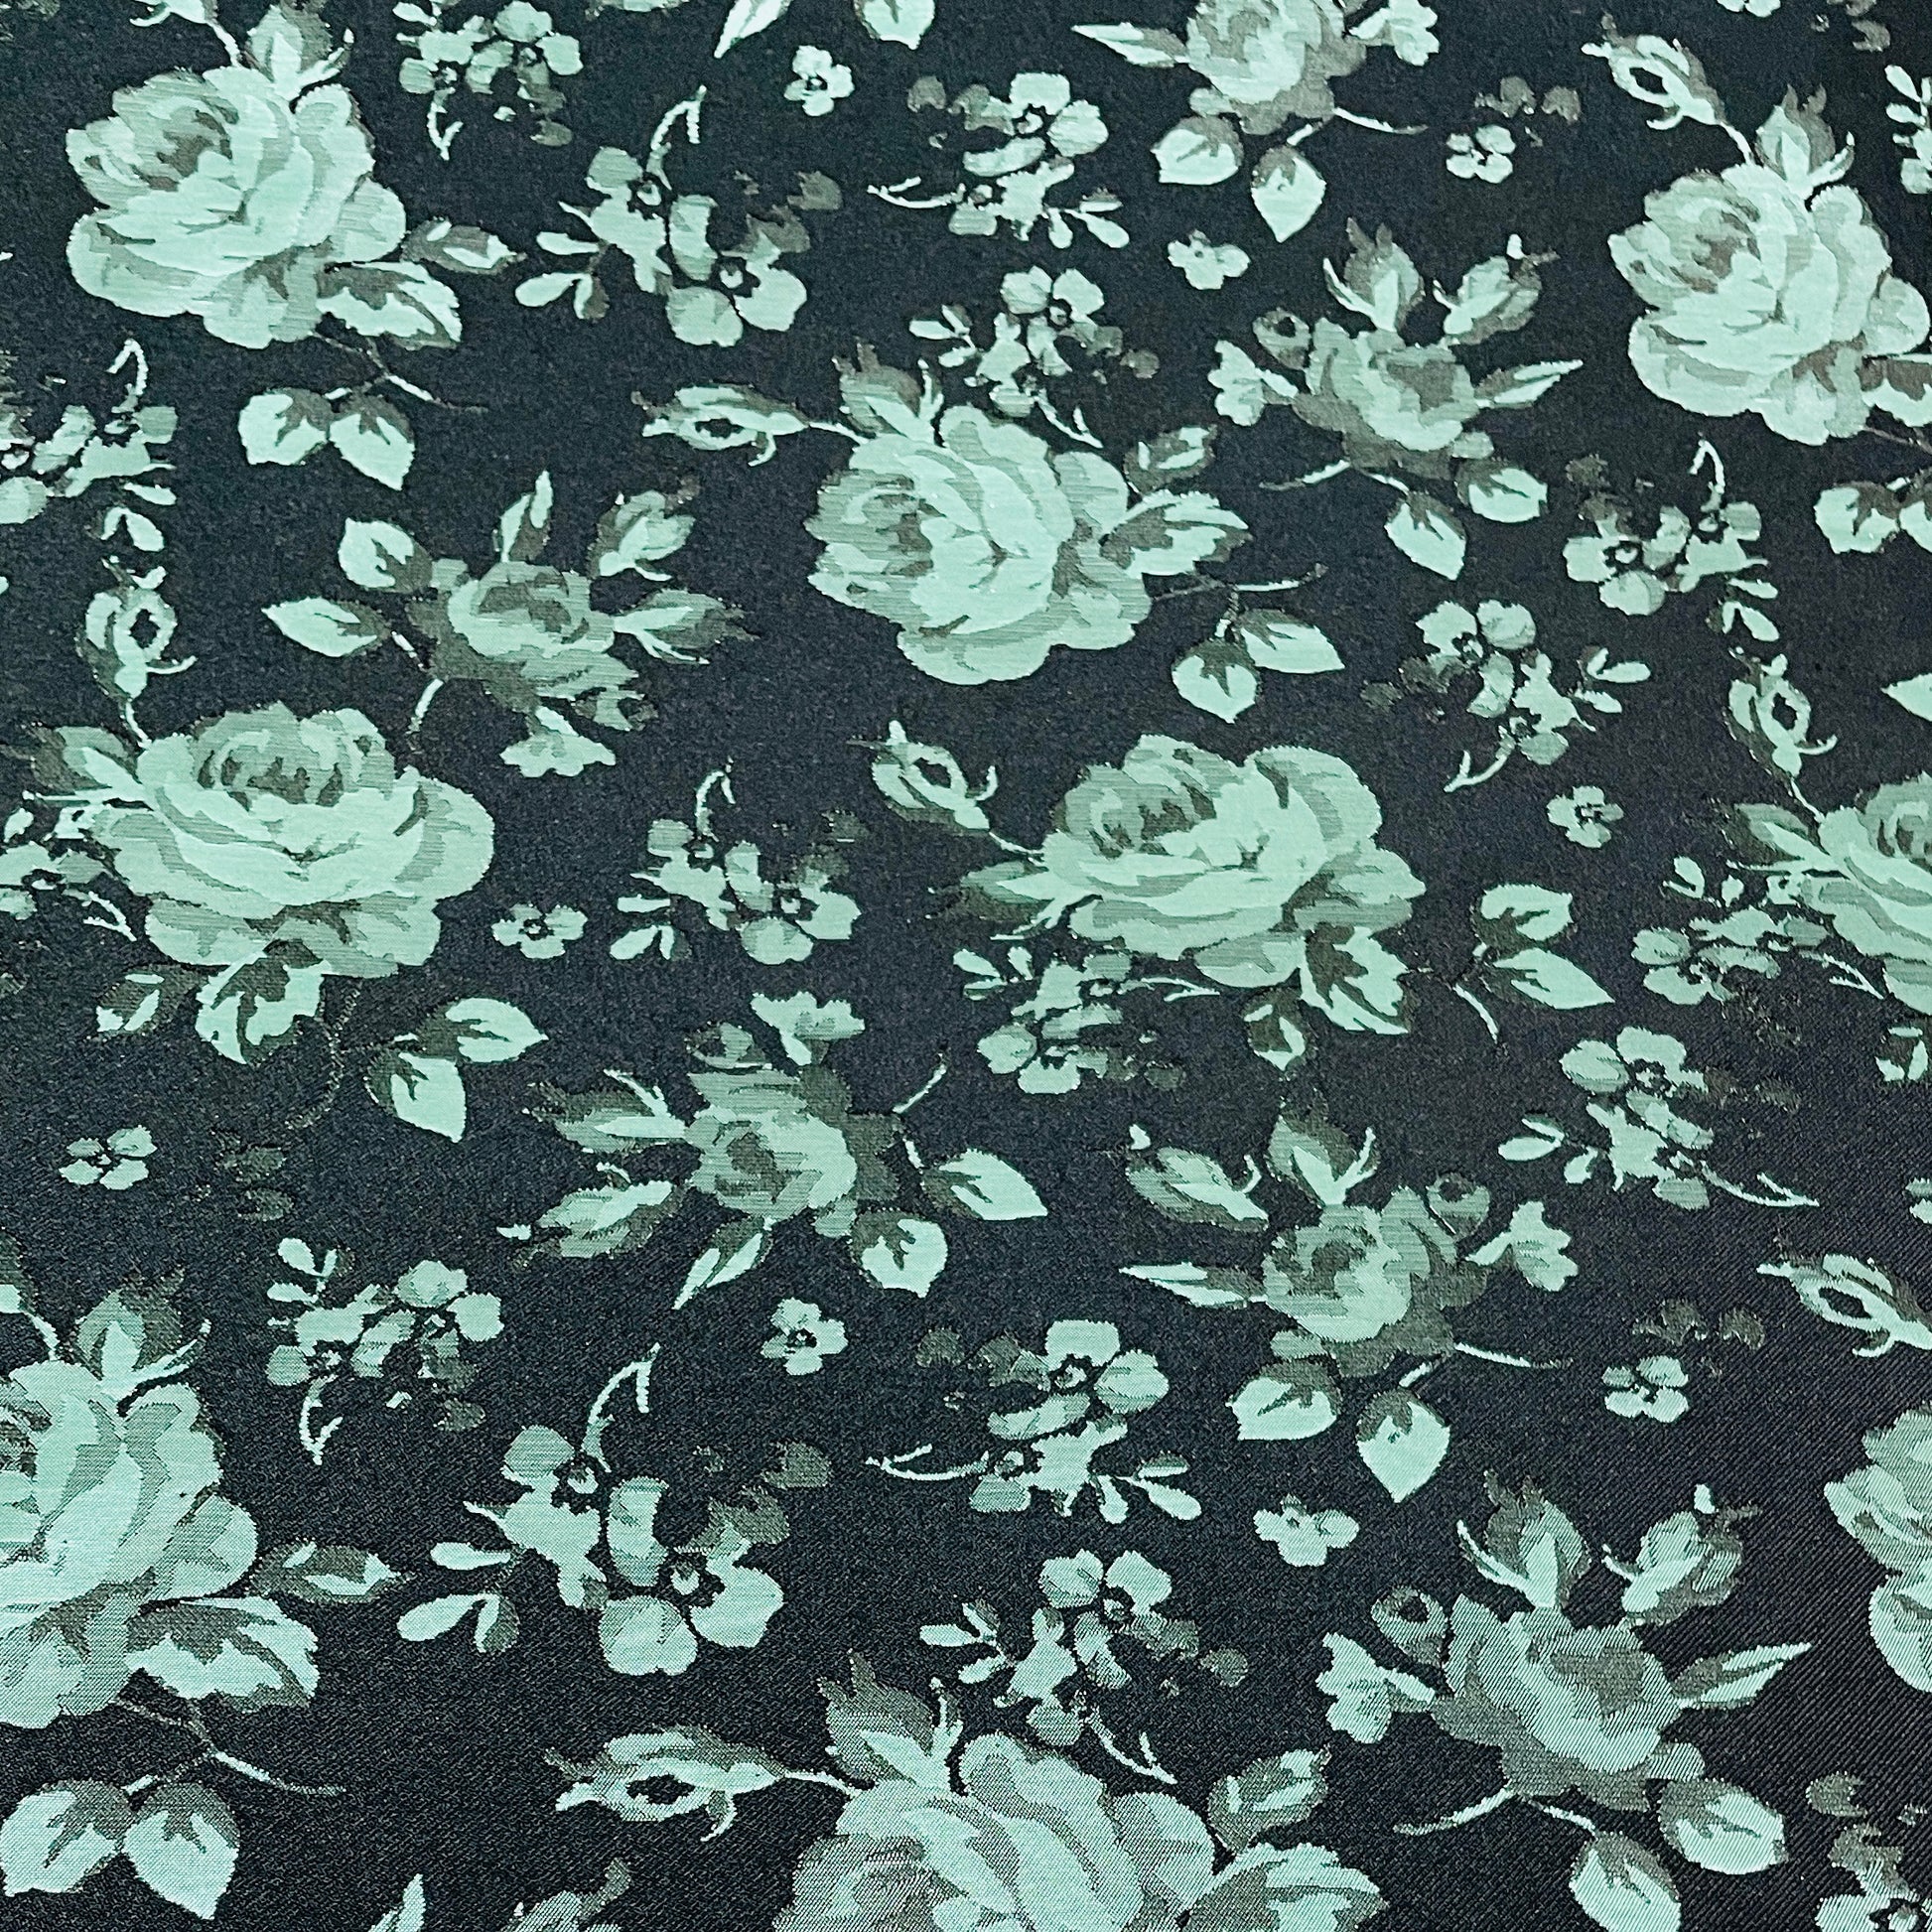 Black & Green Floral Brocade Jacquard Fabric 62 Inches